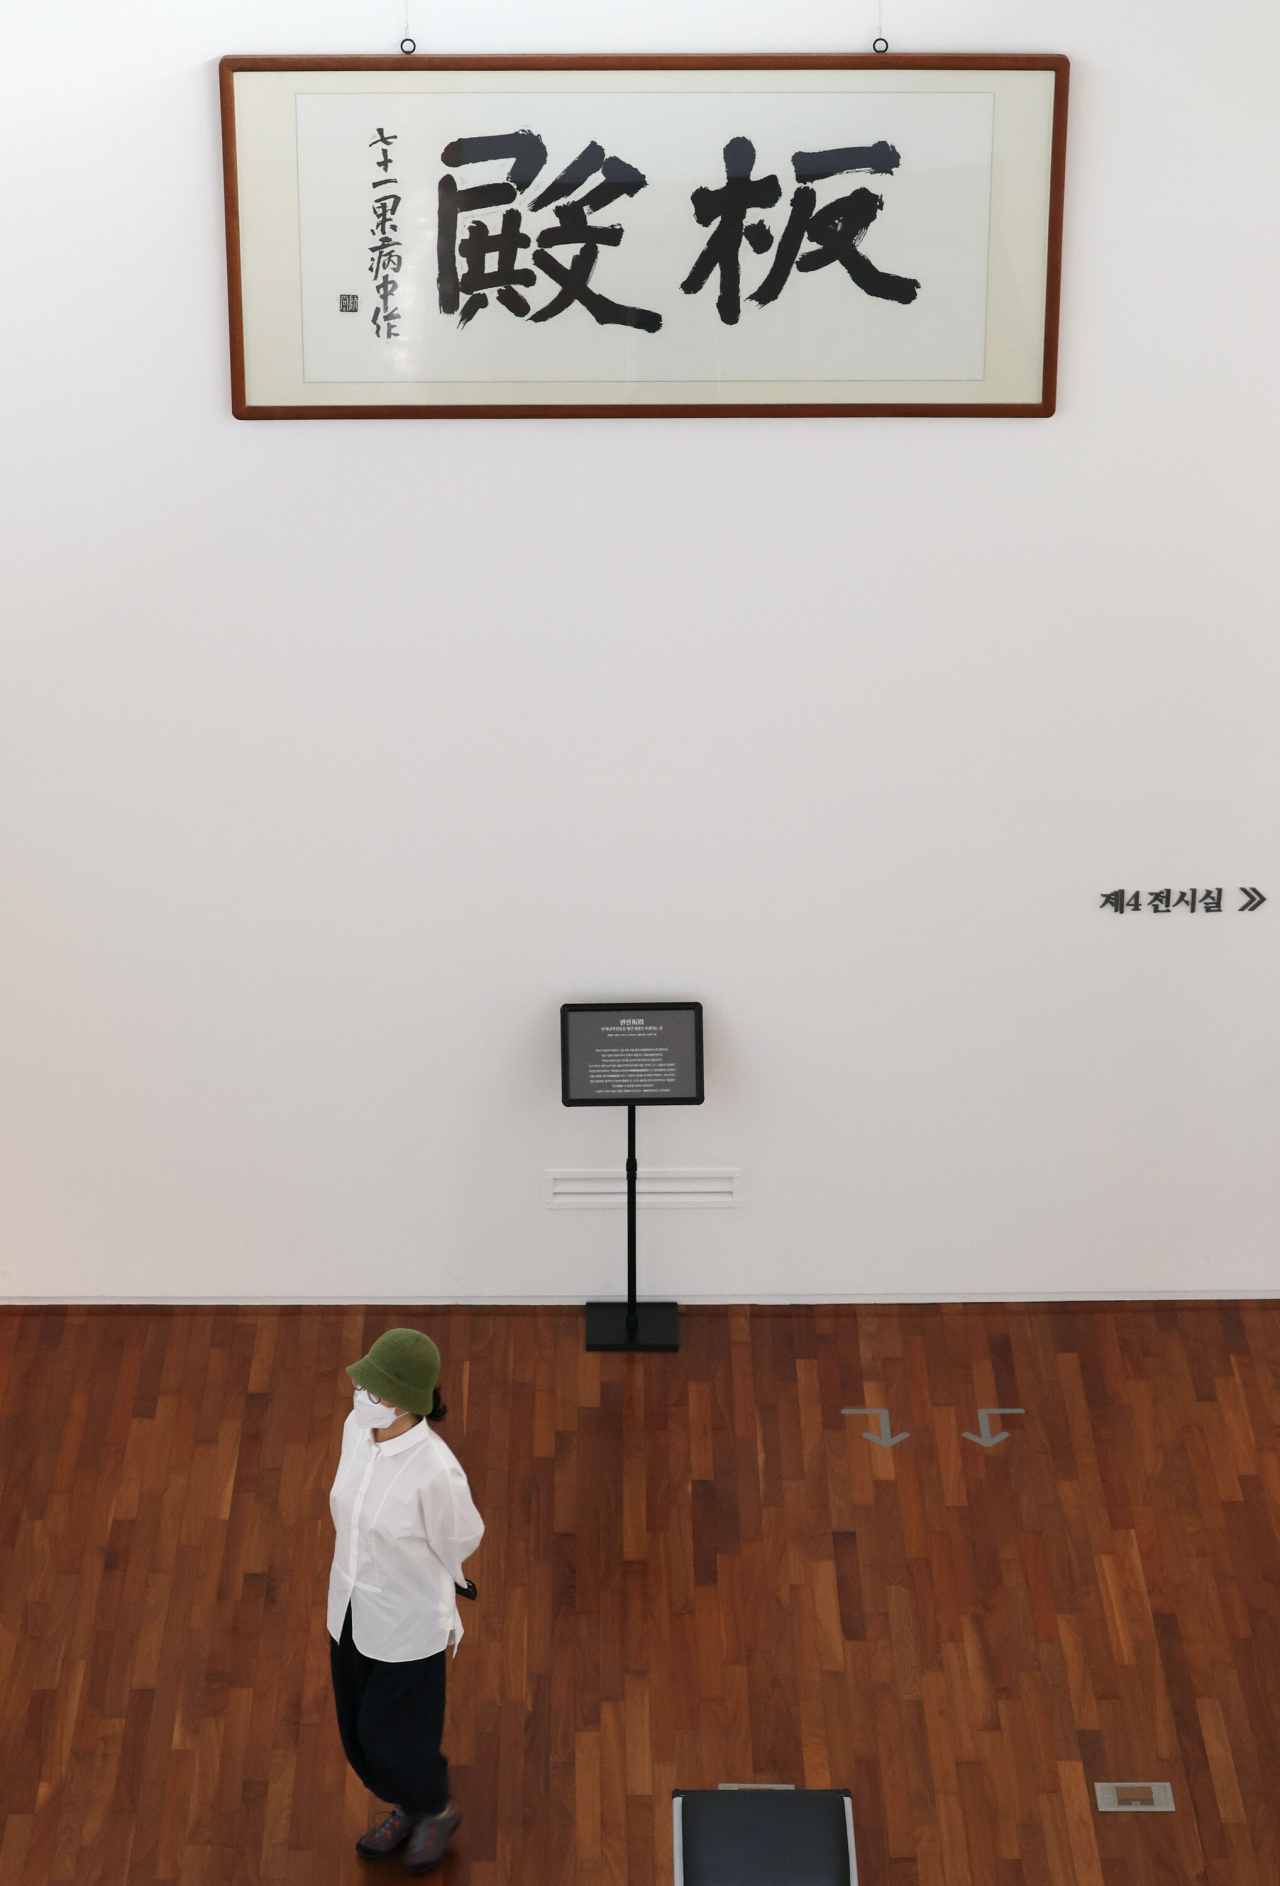 The last known body of calligraphy work by Chusa Kim Jeonng-hui 